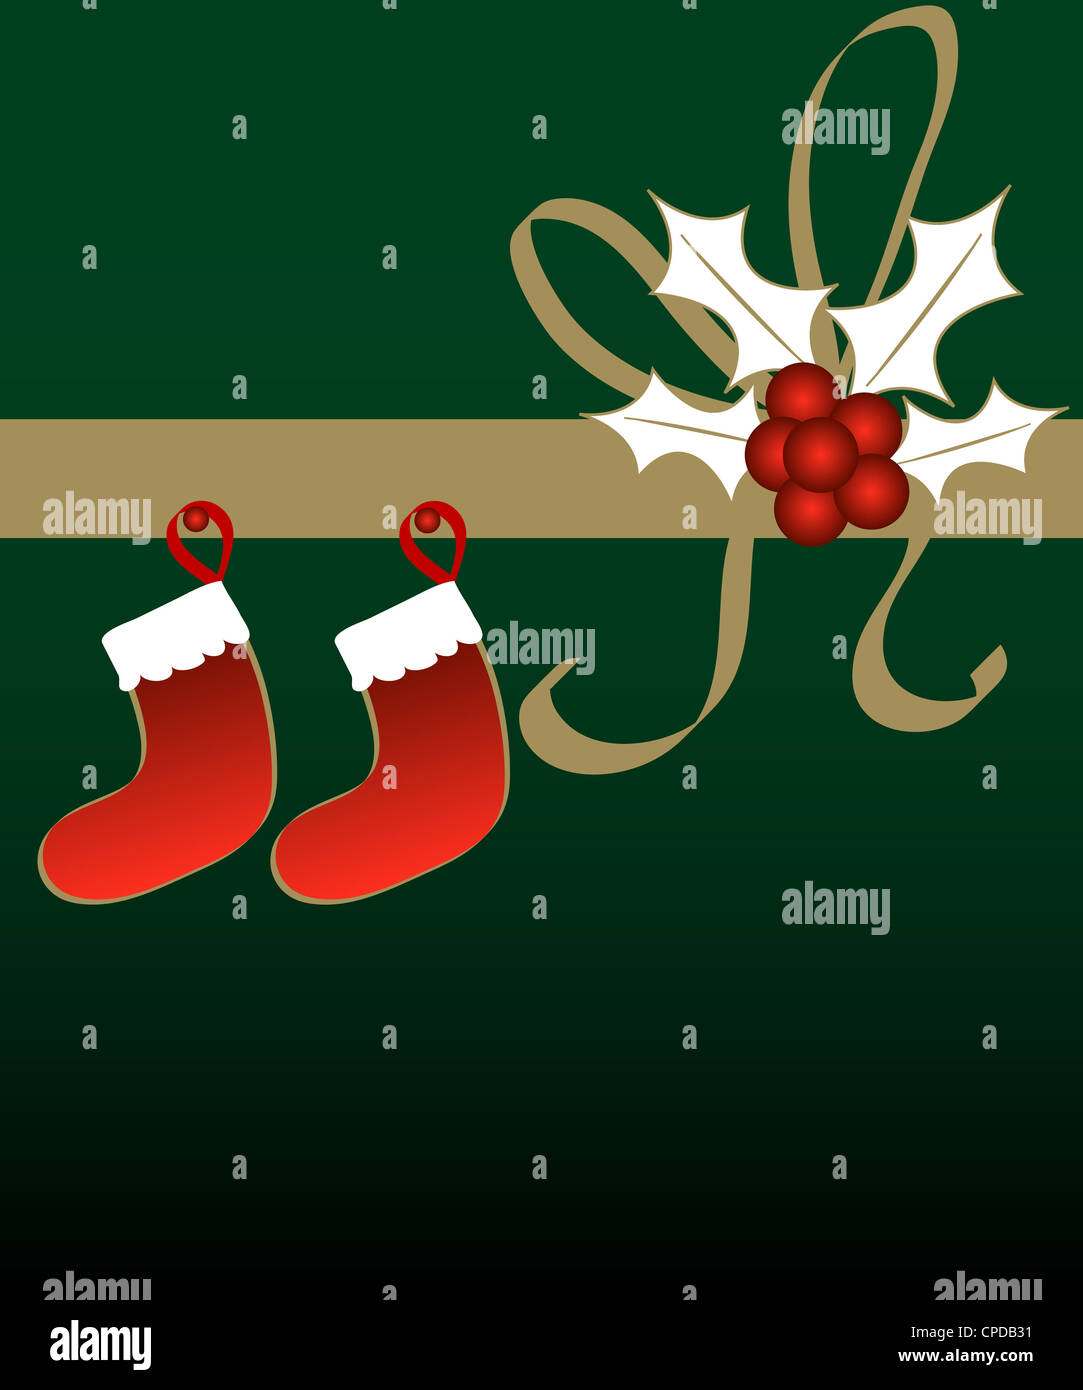 Christmas holly, stockings and ribbon on green background Stock Photo